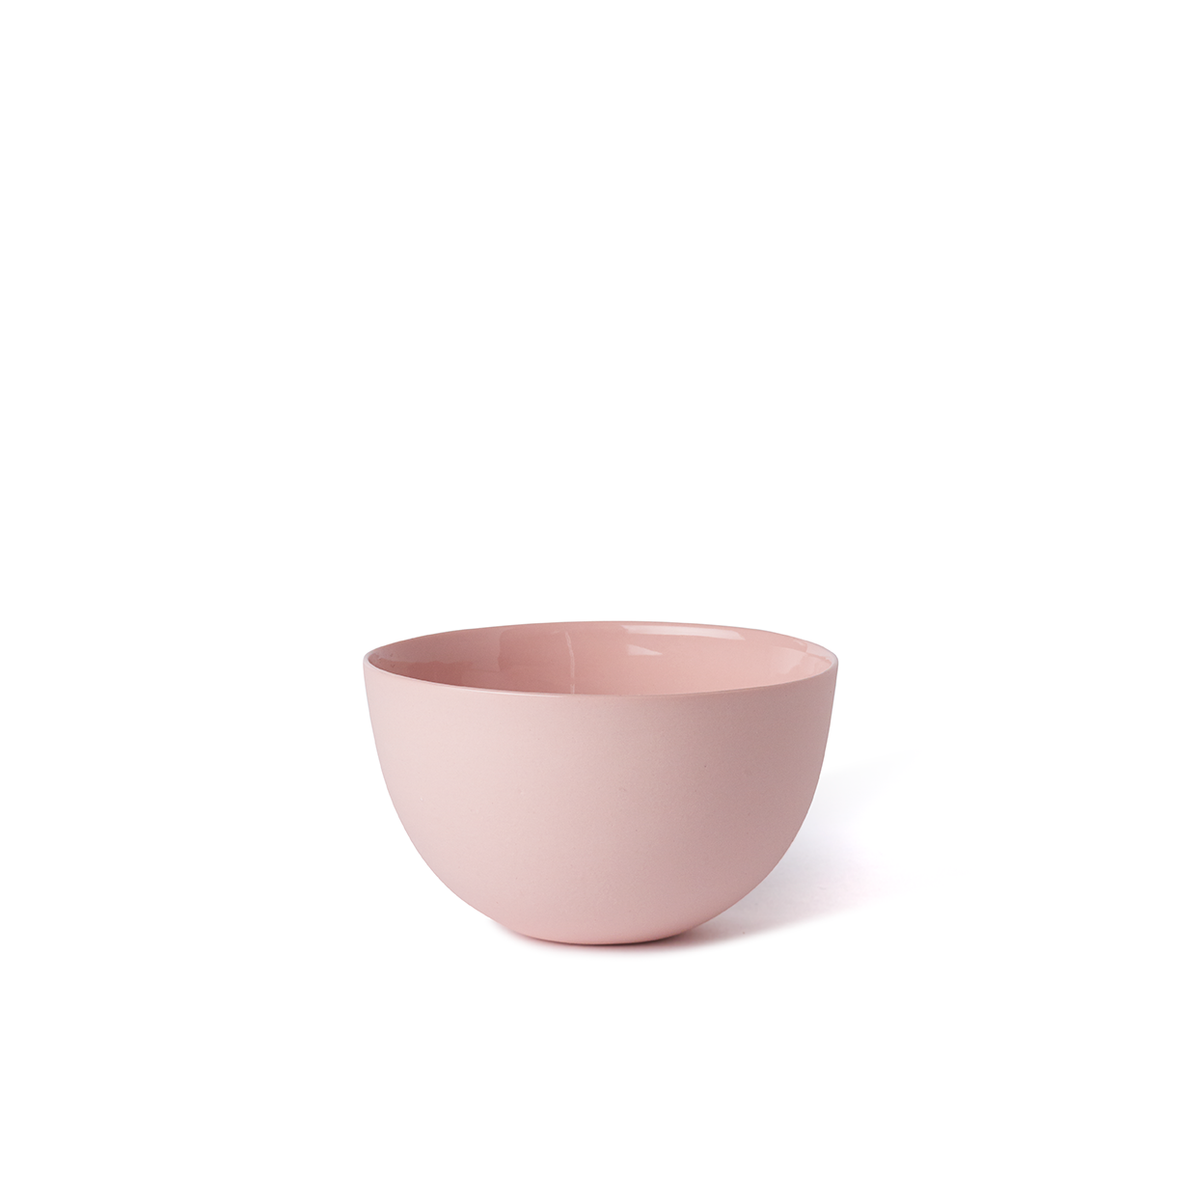 Noodle Bowl Small